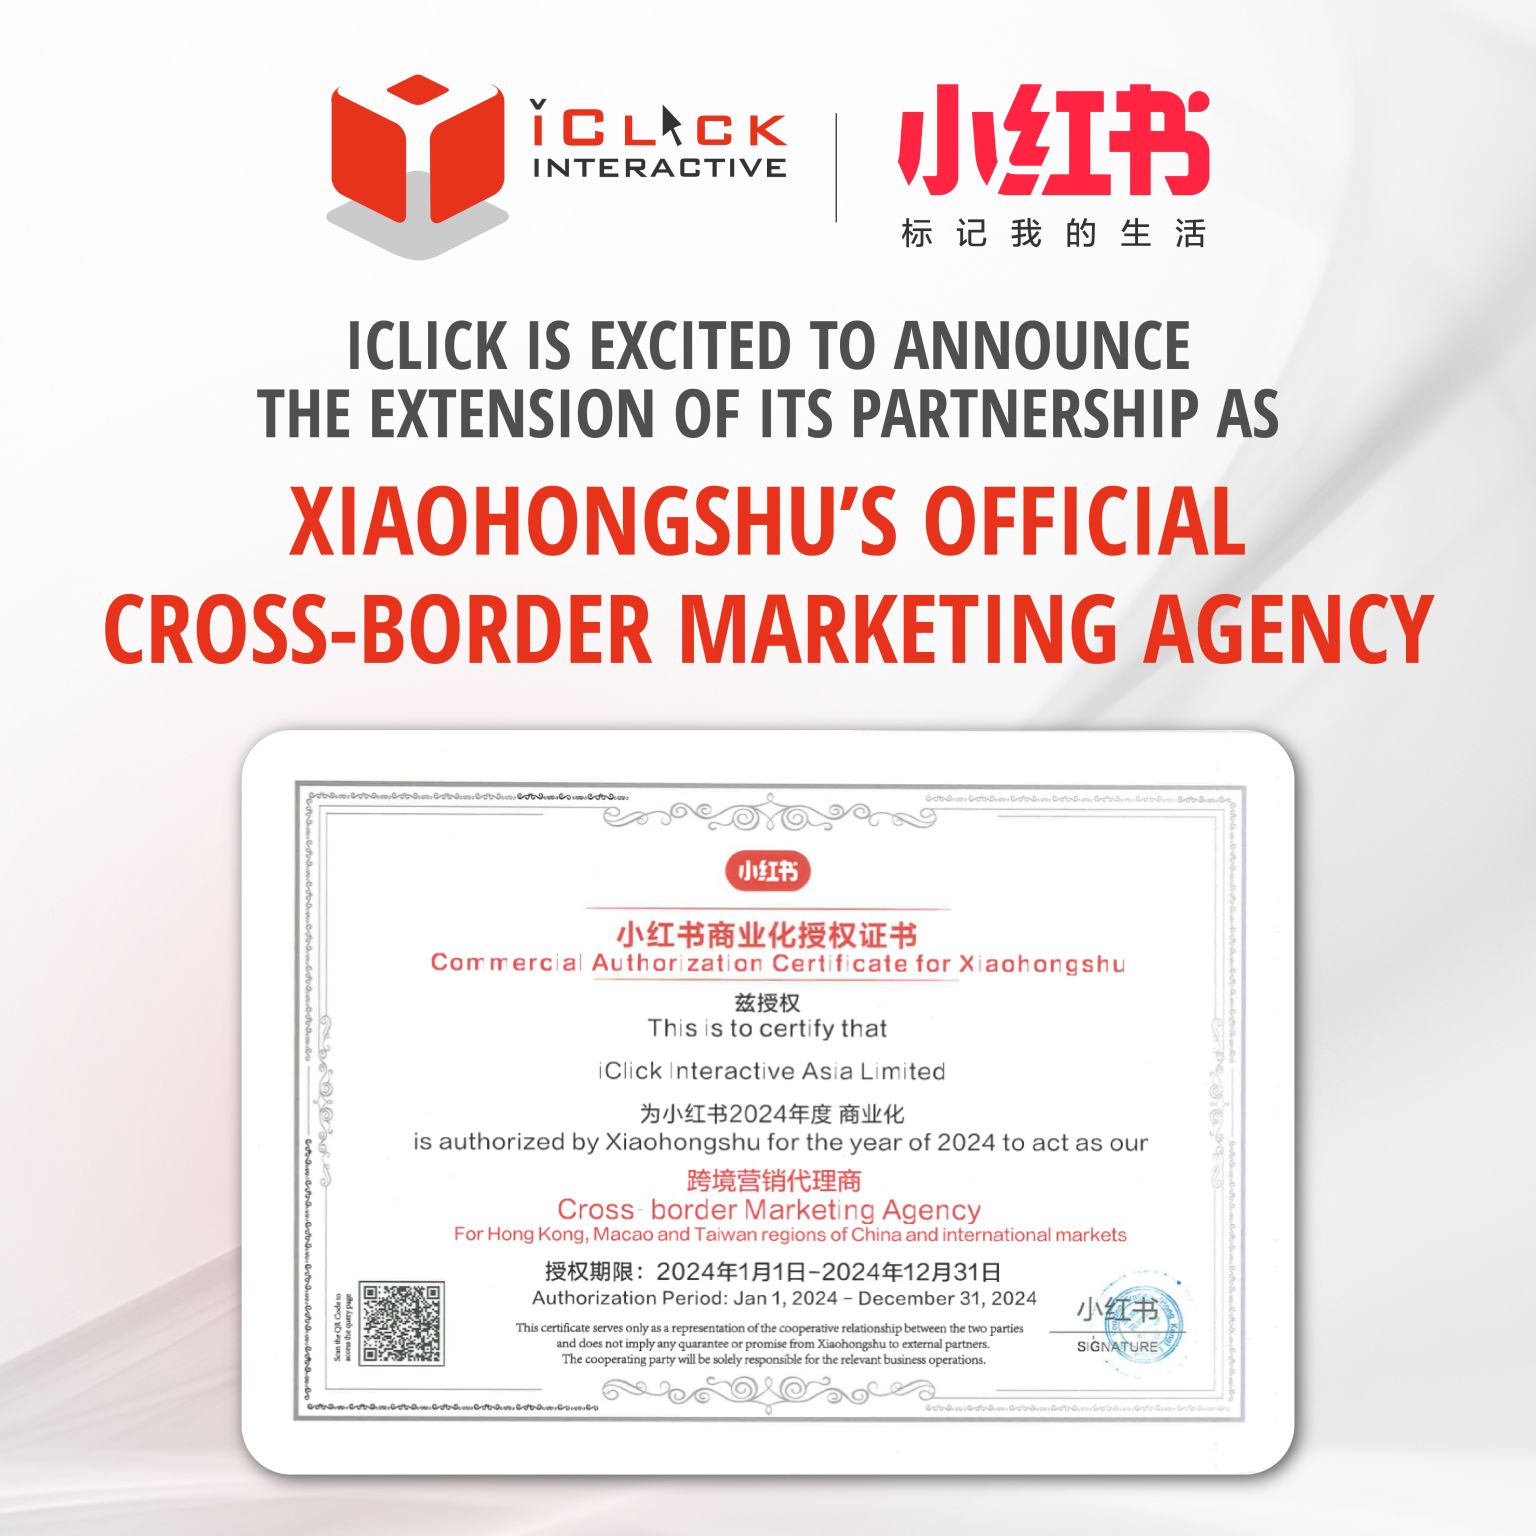 iClick Extends Partnership with Xiaohongshu as Official Cross-Border Marketing Agency